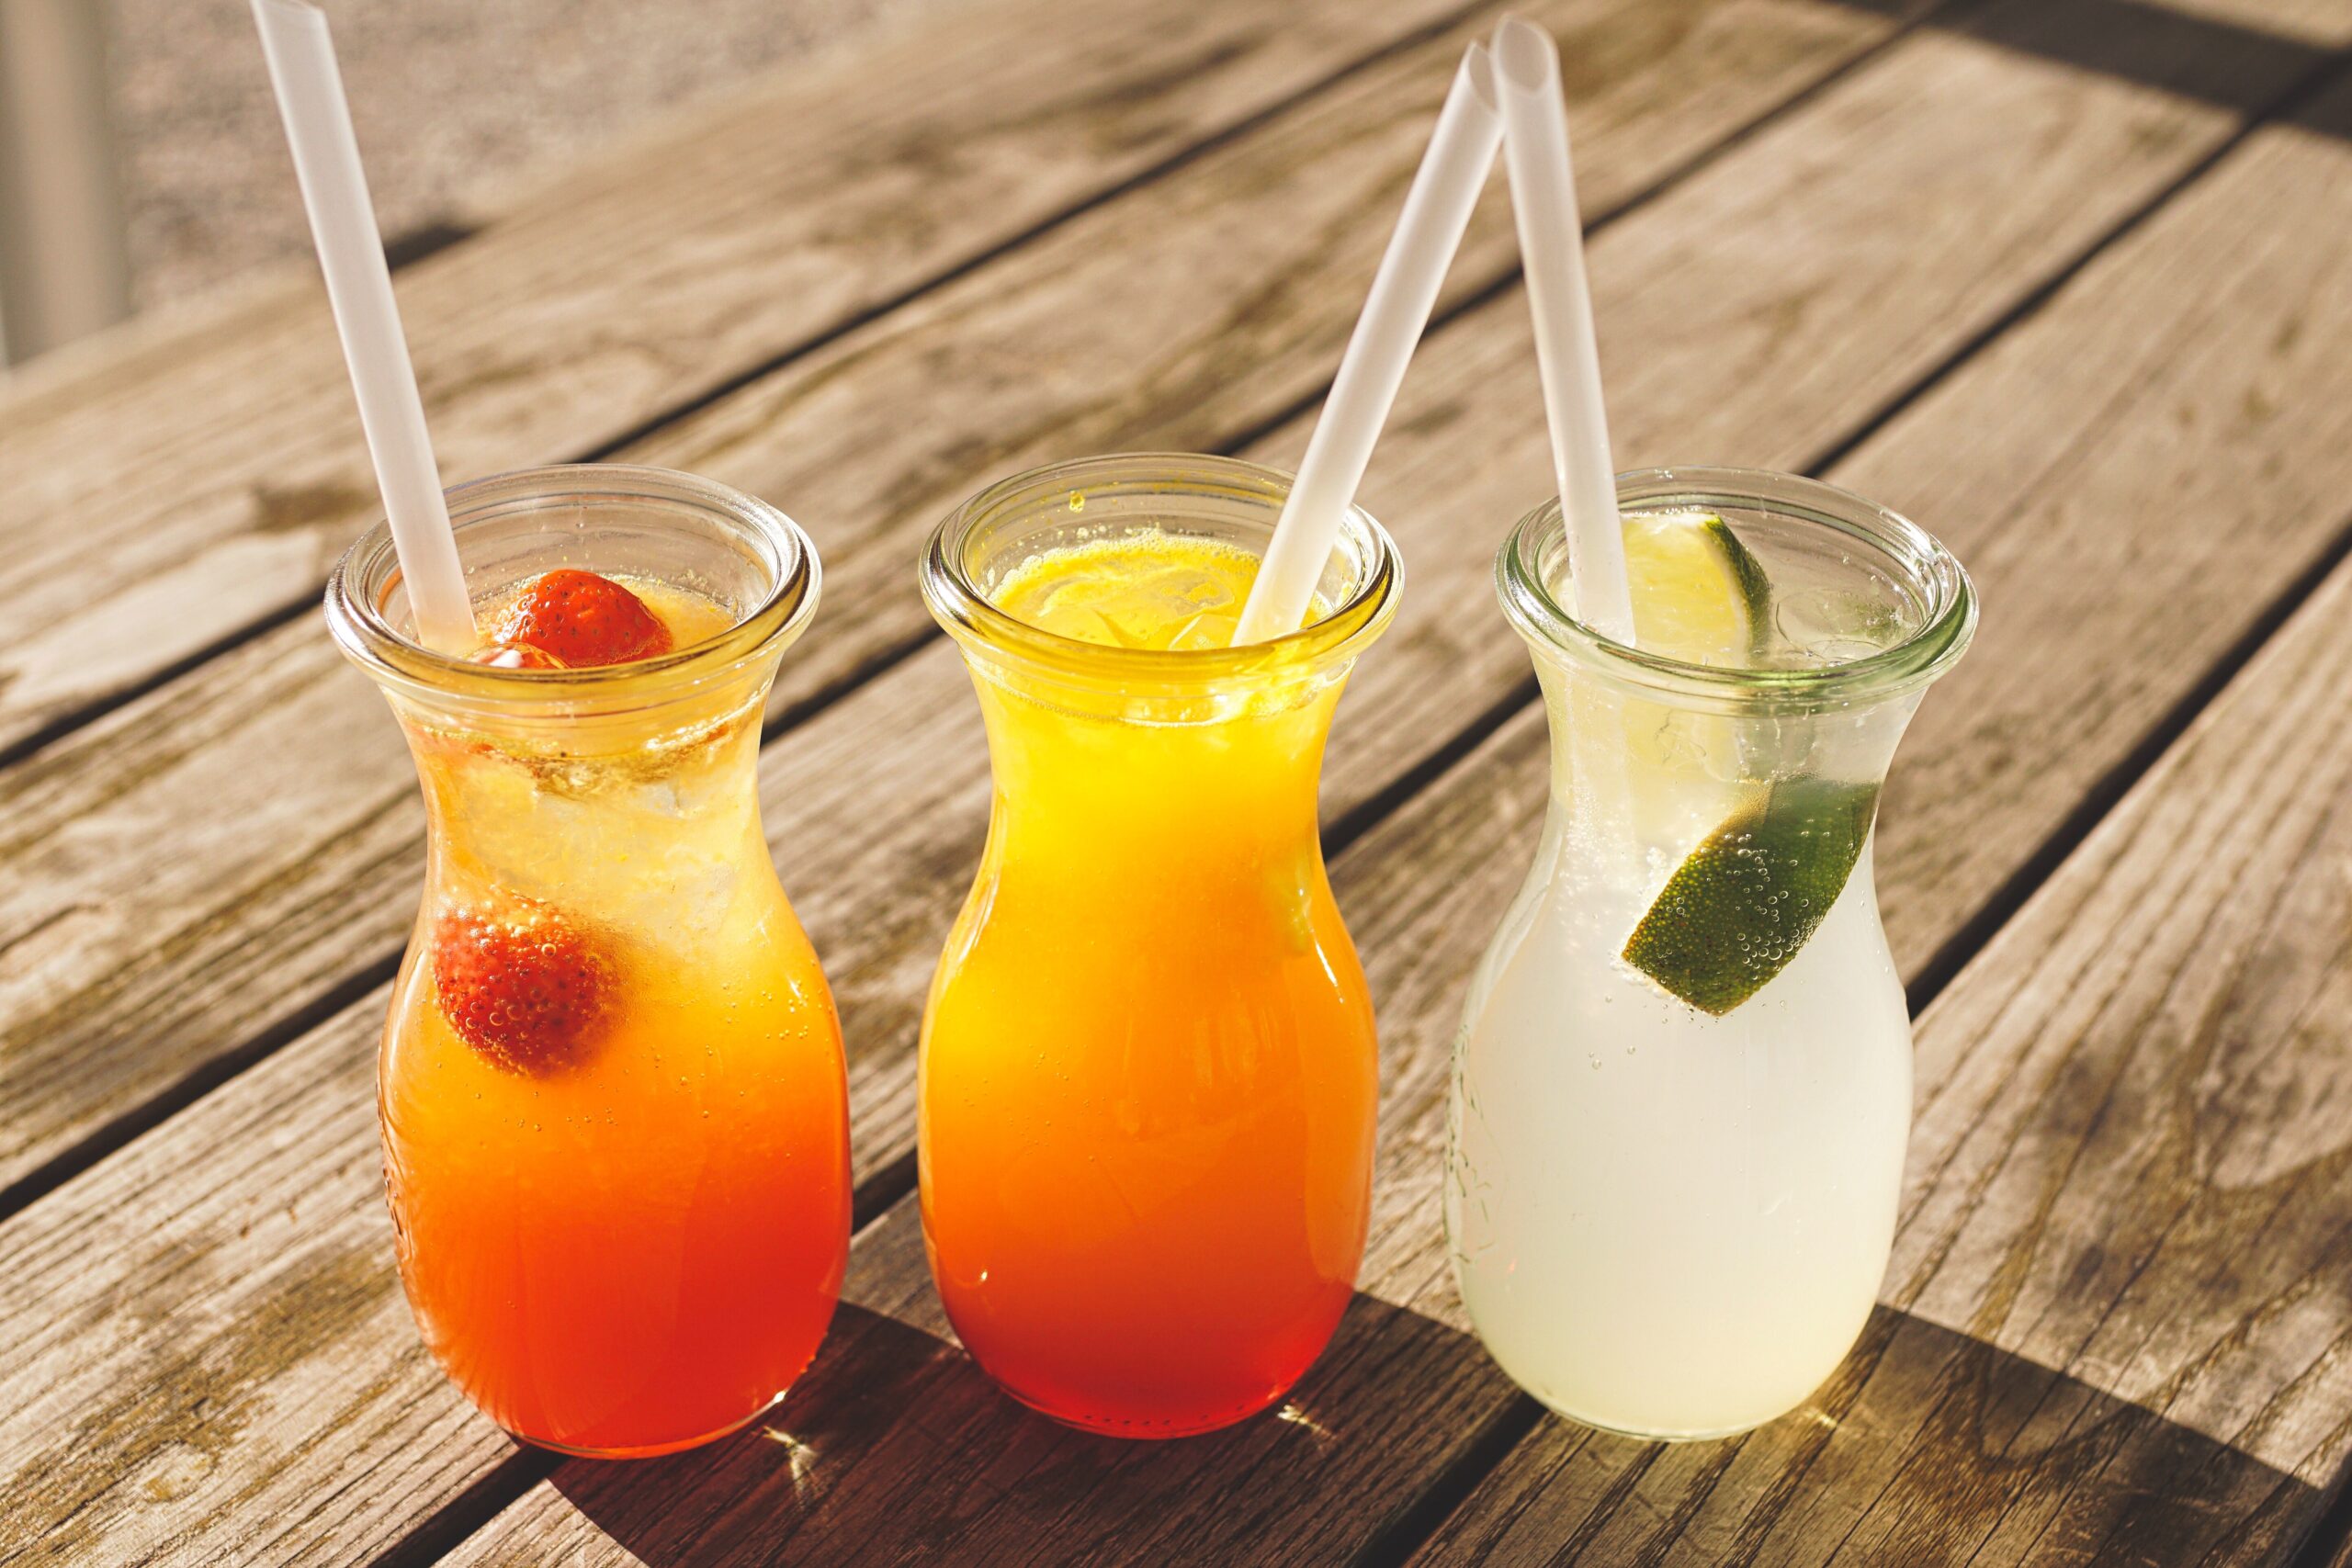 Three cold summer drinks with straws sit on a wood table. Two are orange and red in color, and one is white.